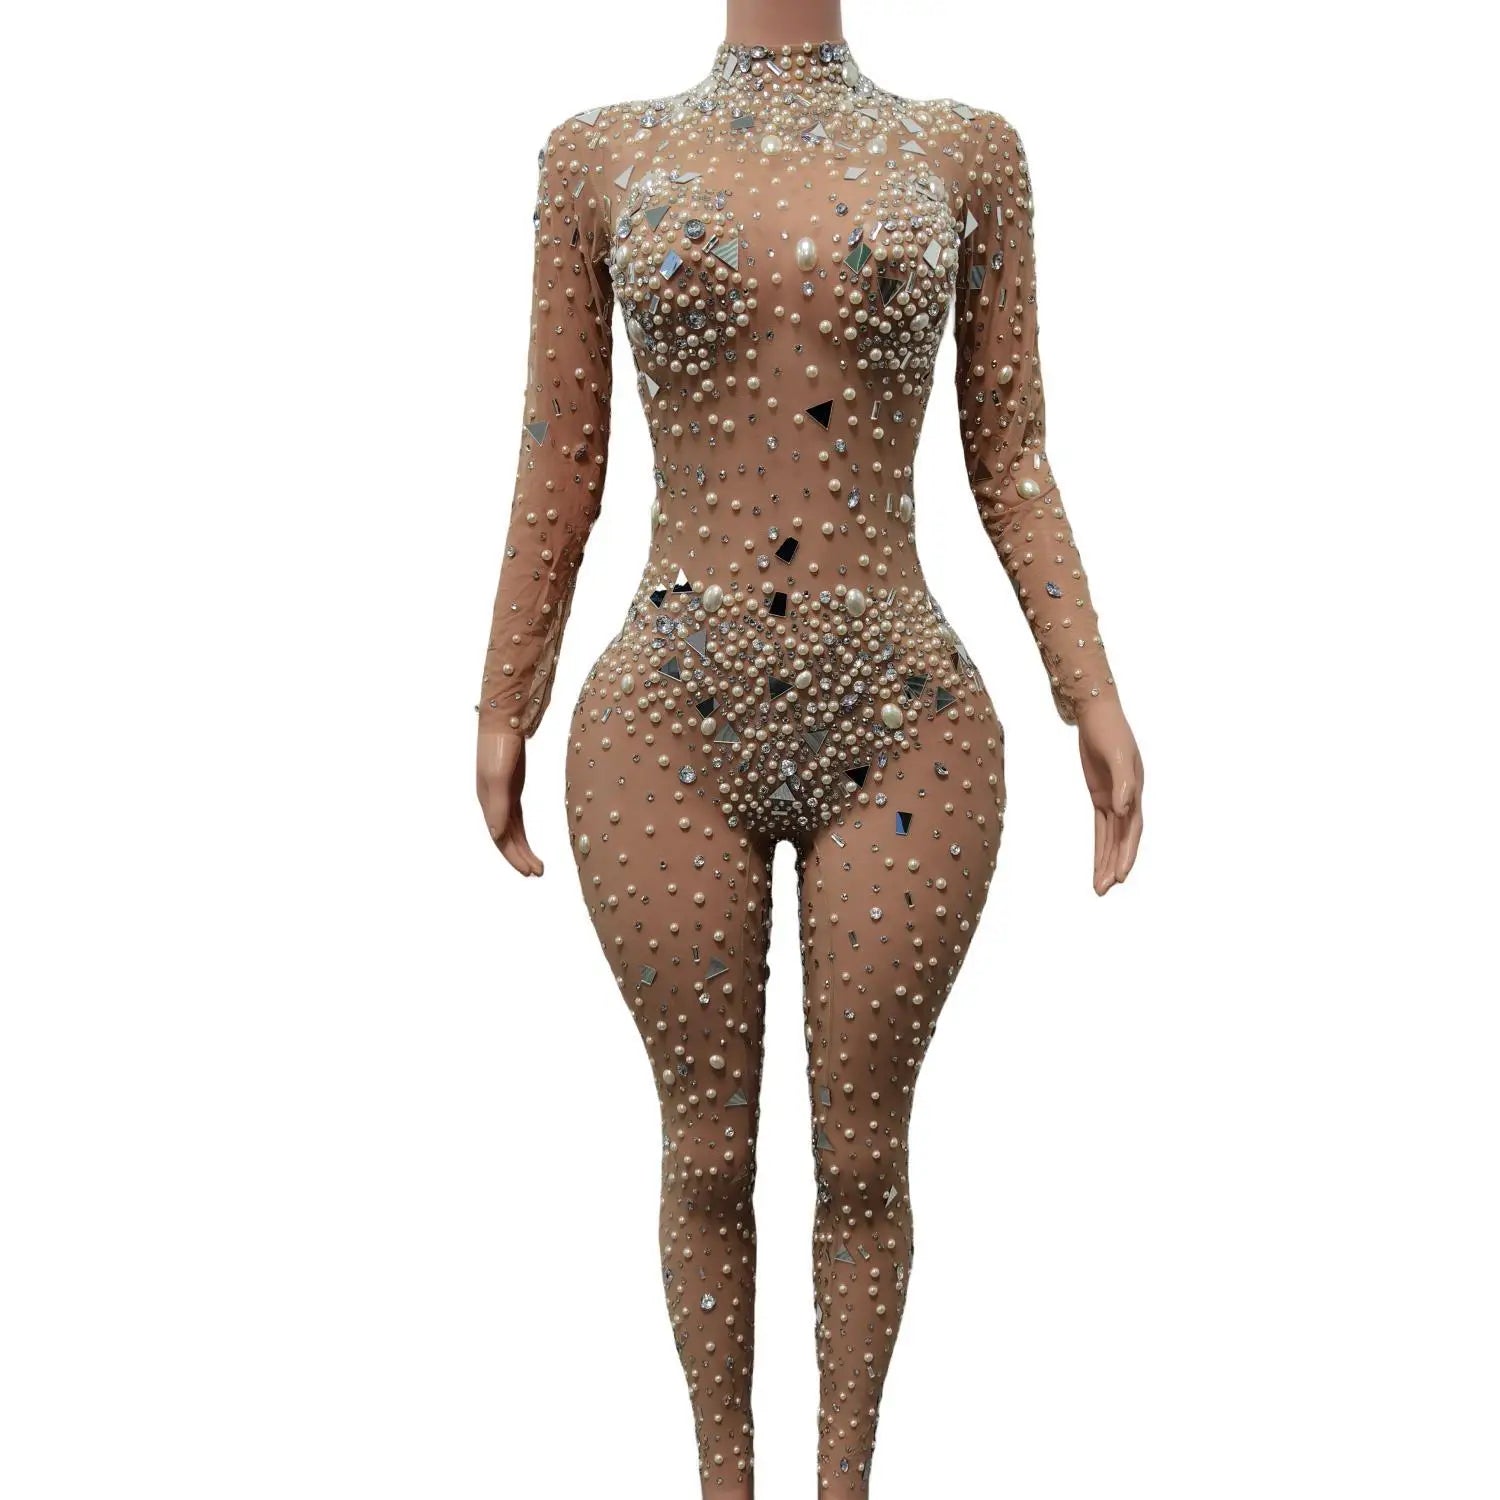 Sexy Sparkly Rhinestones Mirrors Mesh Jumpsuit Women Pearls Birthday Party Outfit Dancer Show Rompers Photo Shoot Dress